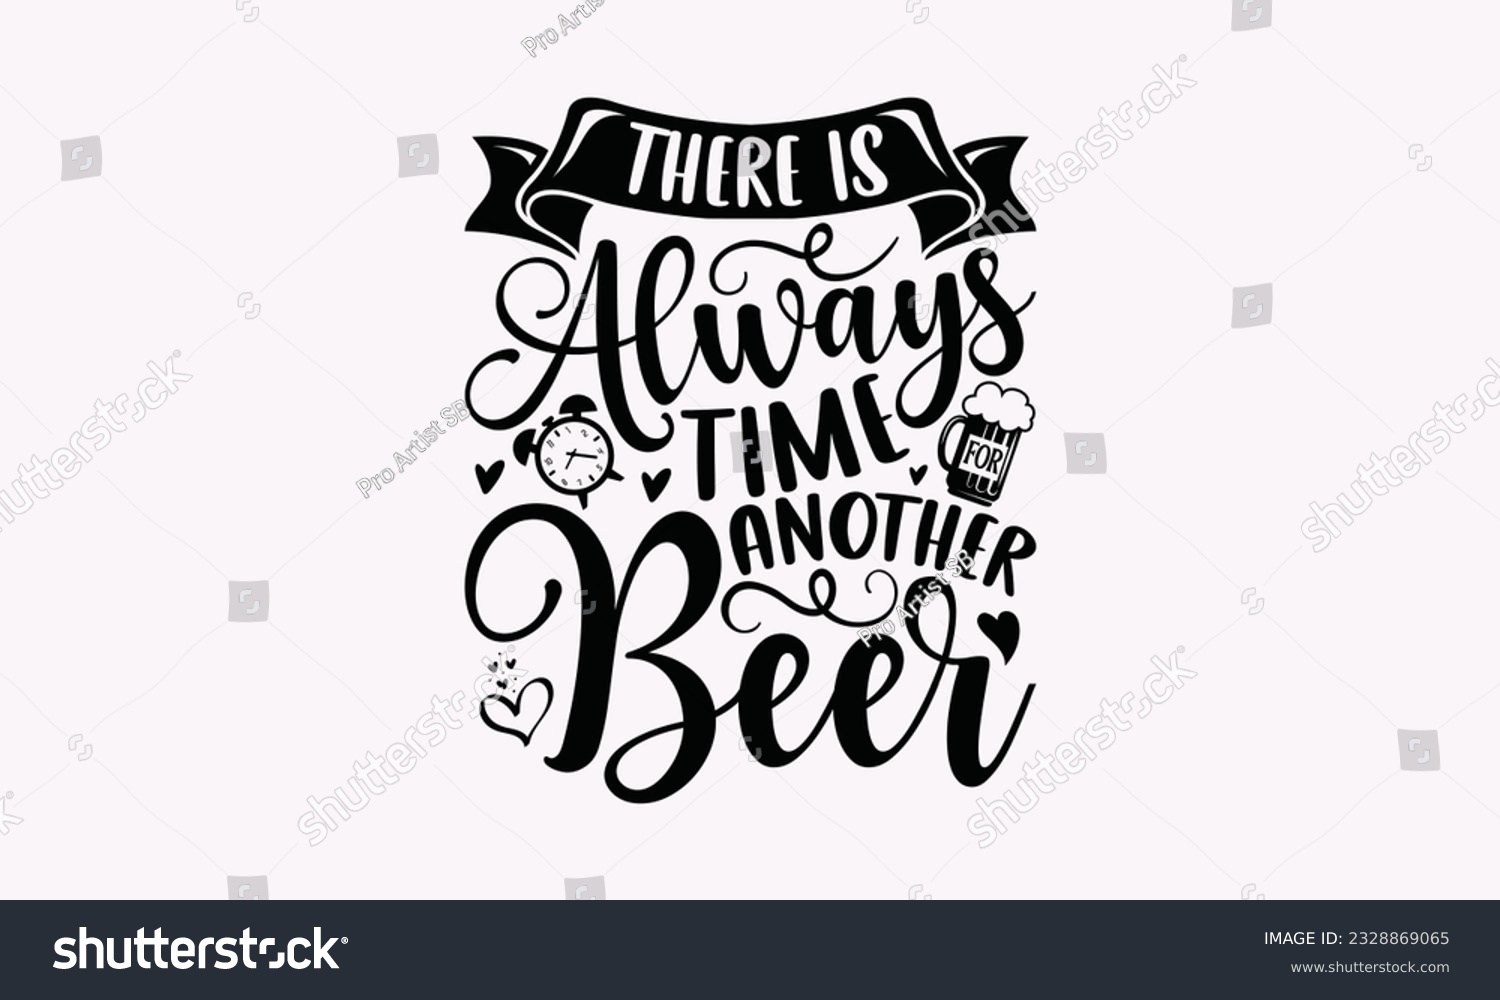 SVG of There Is Always Time For Another Beer - Alcohol SVG Design, Cheer Quotes, Hand drawn lettering phrase, Isolated on white background. svg